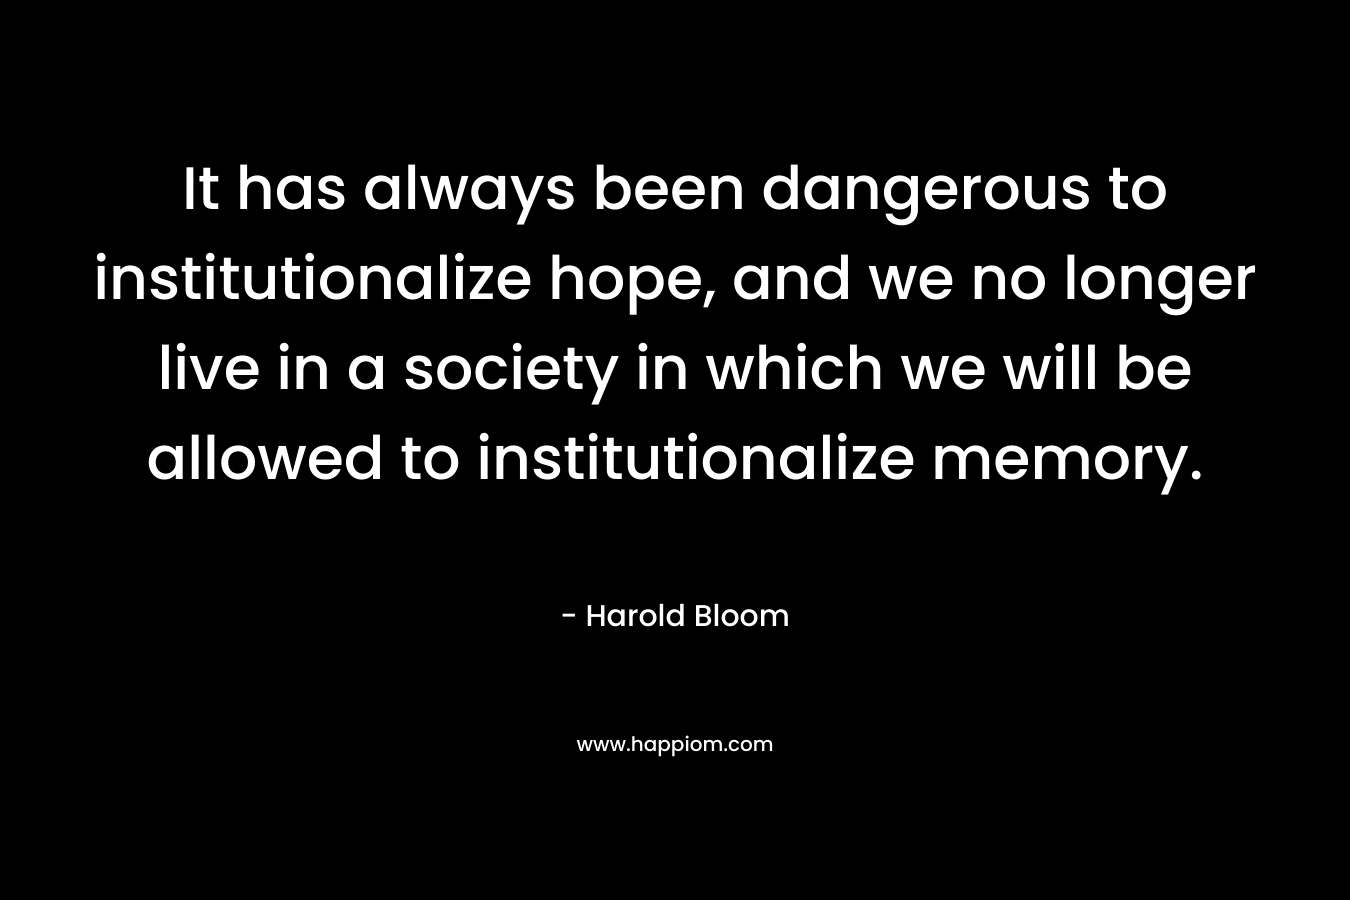 It has always been dangerous to institutionalize hope, and we no longer live in a society in which we will be allowed to institutionalize memory. – Harold Bloom